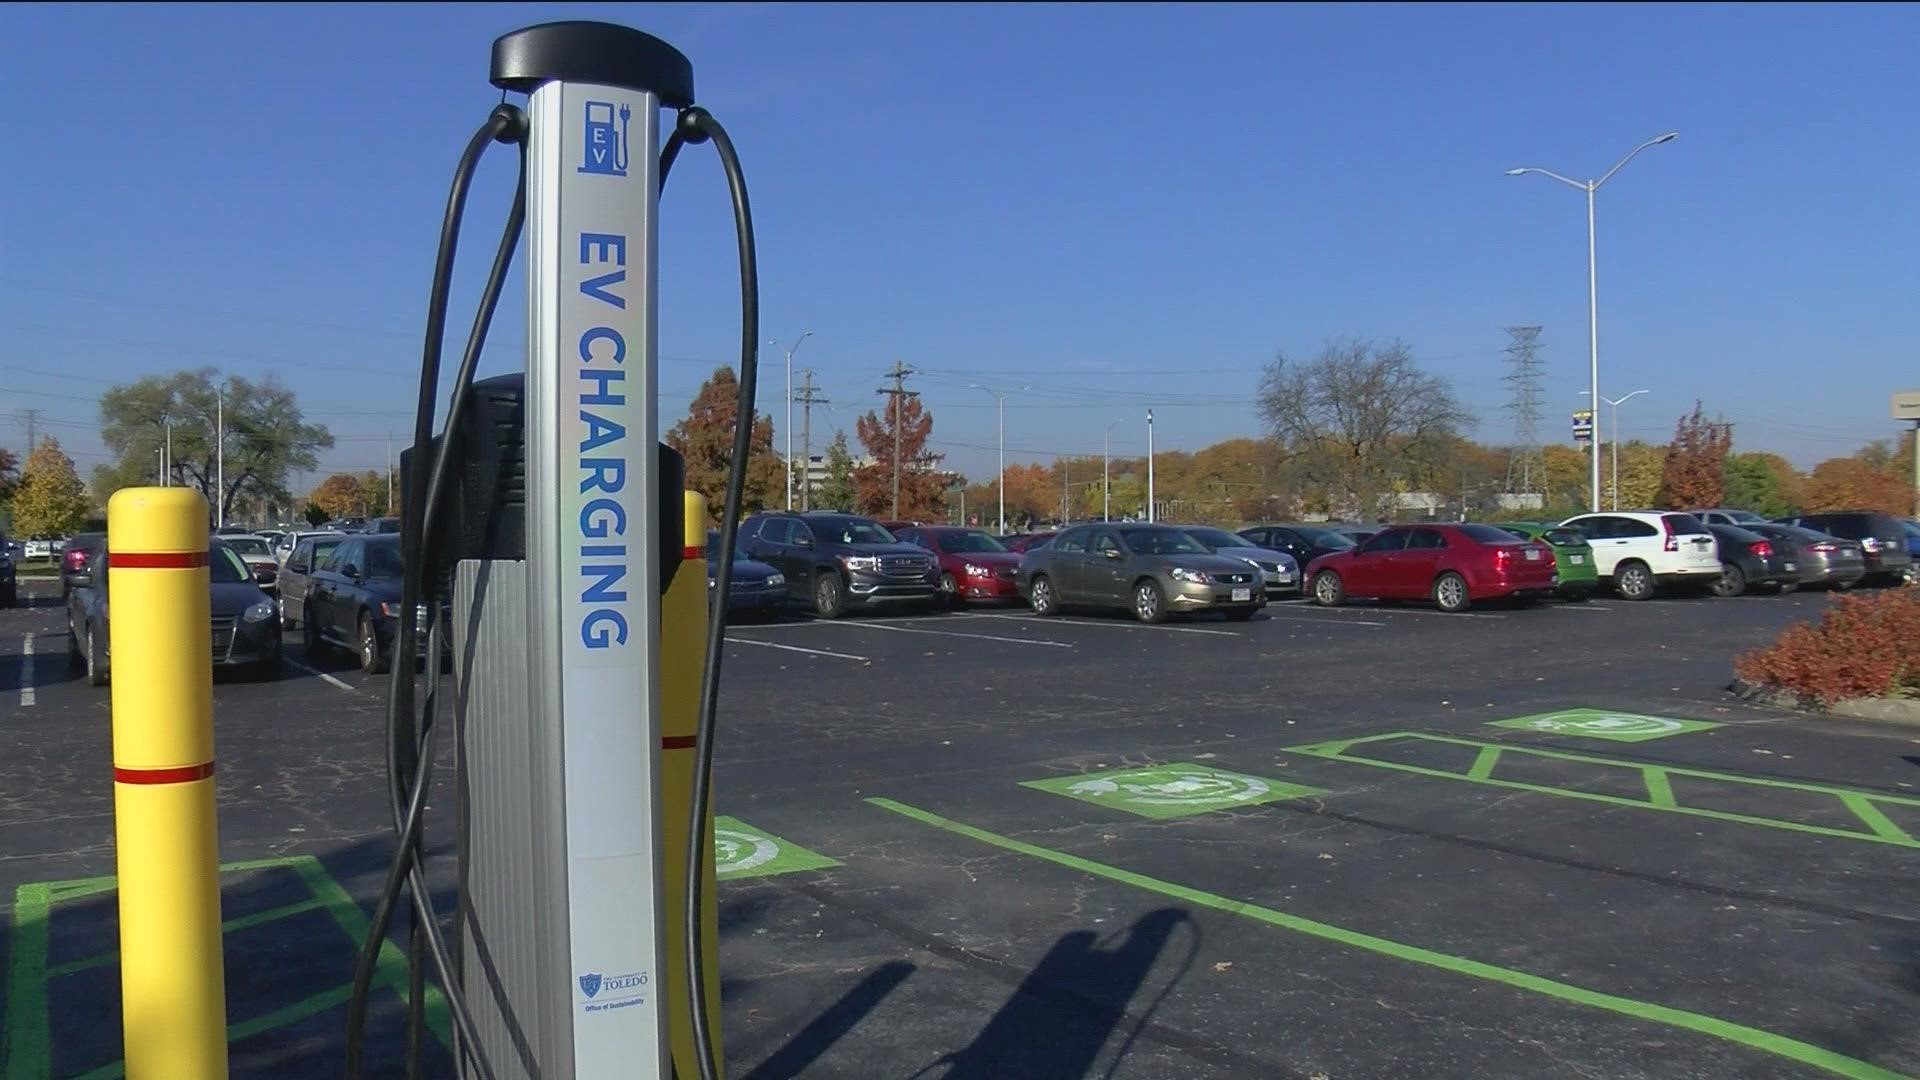 The University of Toledo is enhancing a greener initiative on campus by installing more charging stations for electric vehicles.